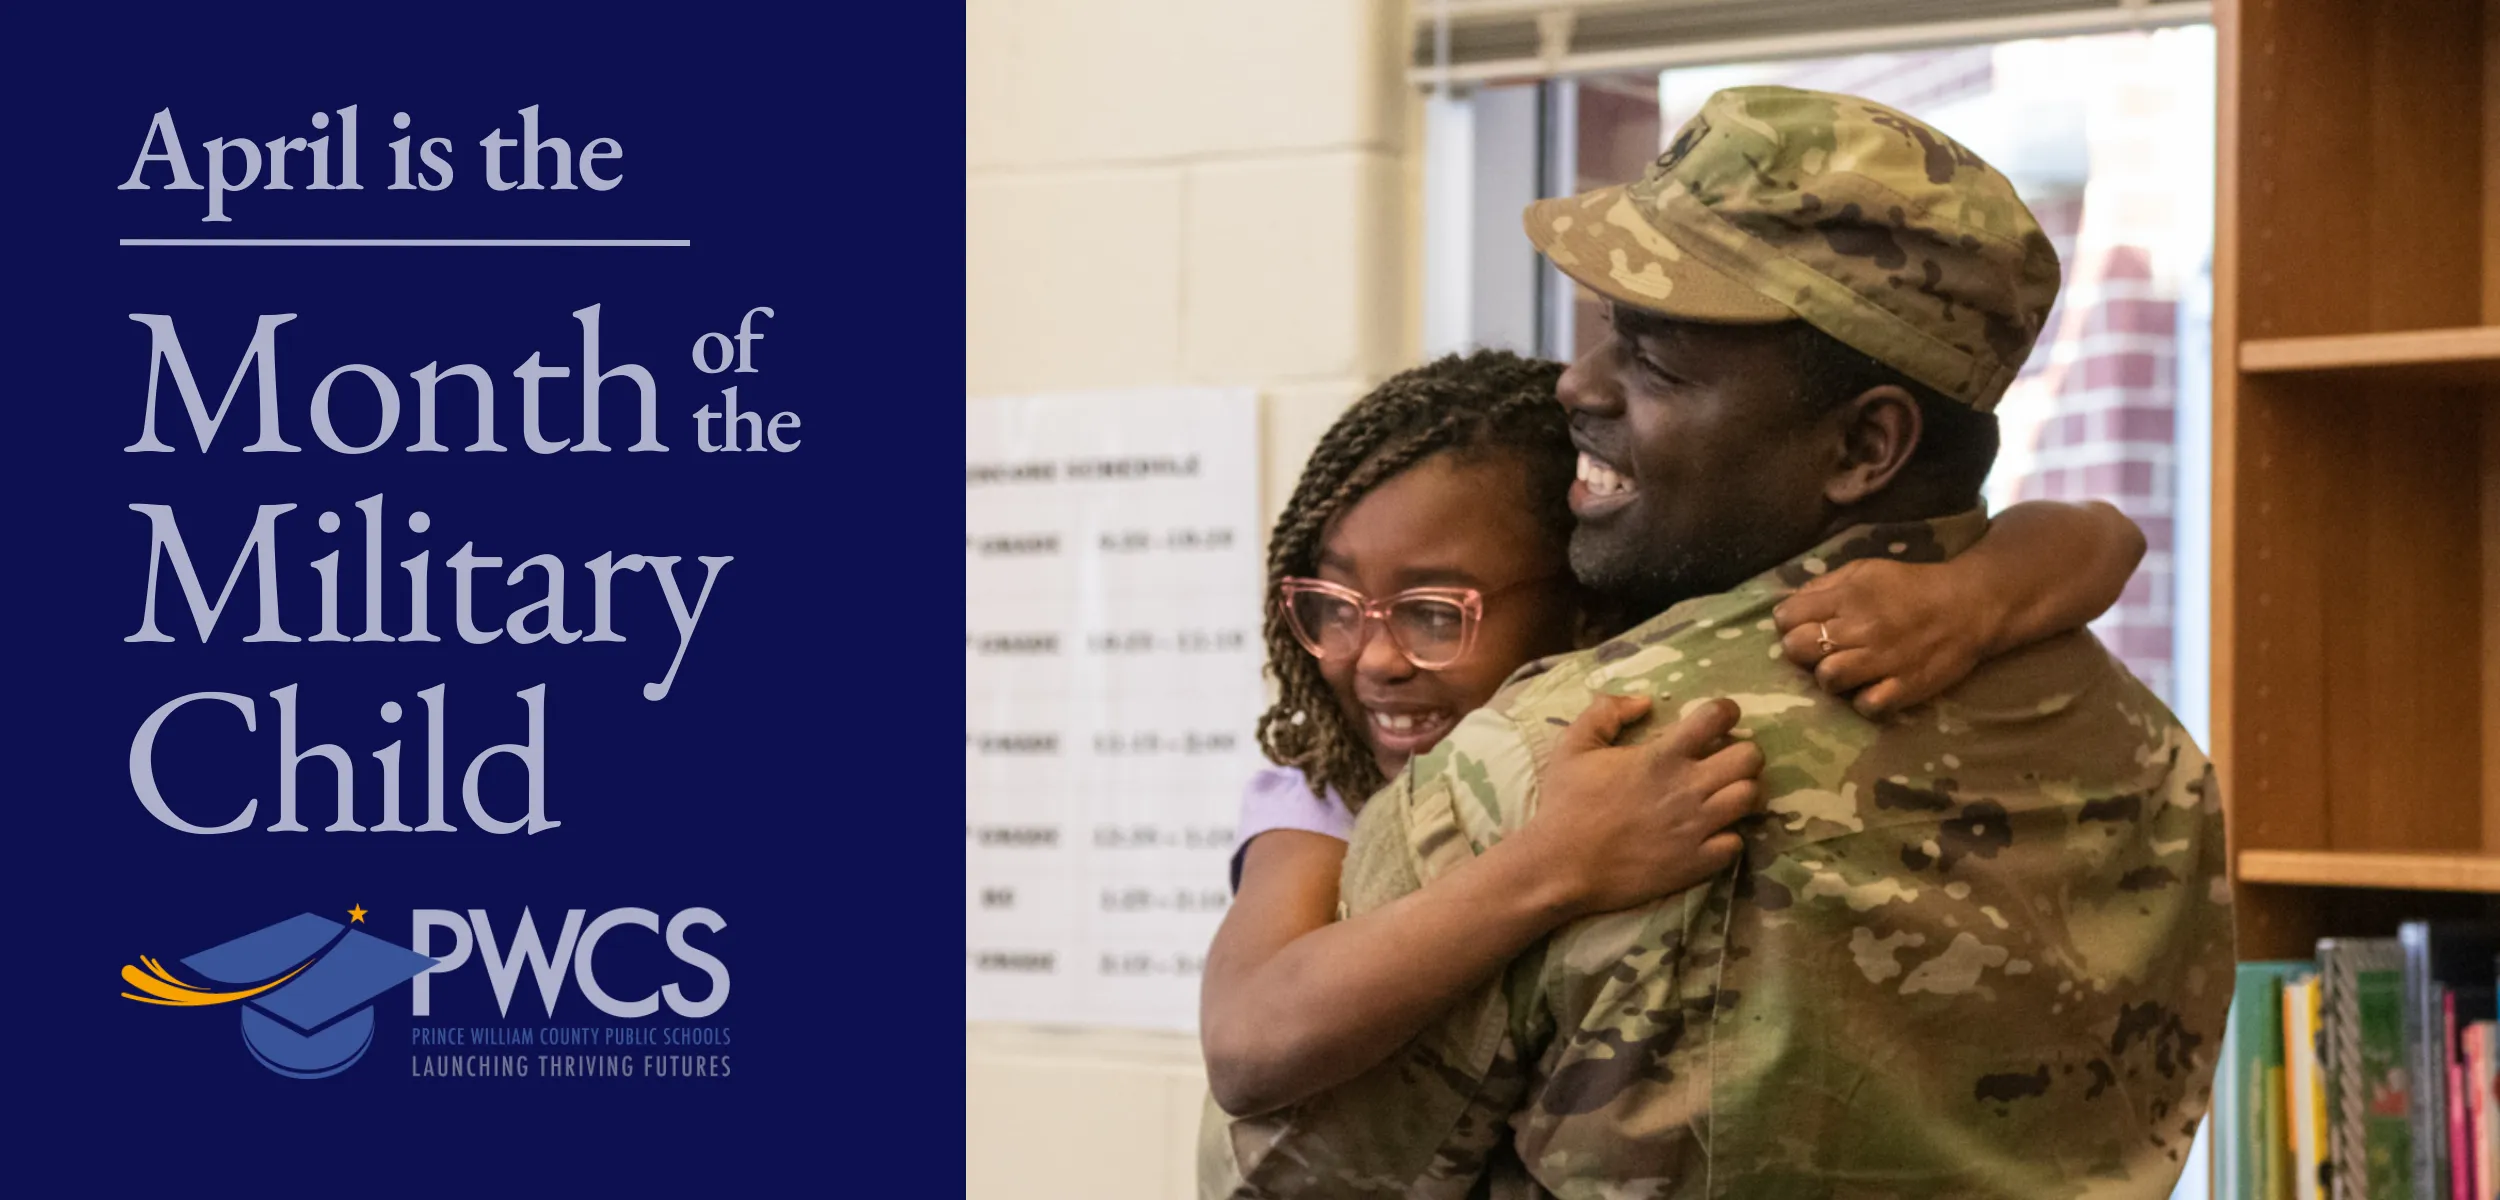 April is the Month of the Military Child webpage banner with PWCS Launching Thriving Futures logo